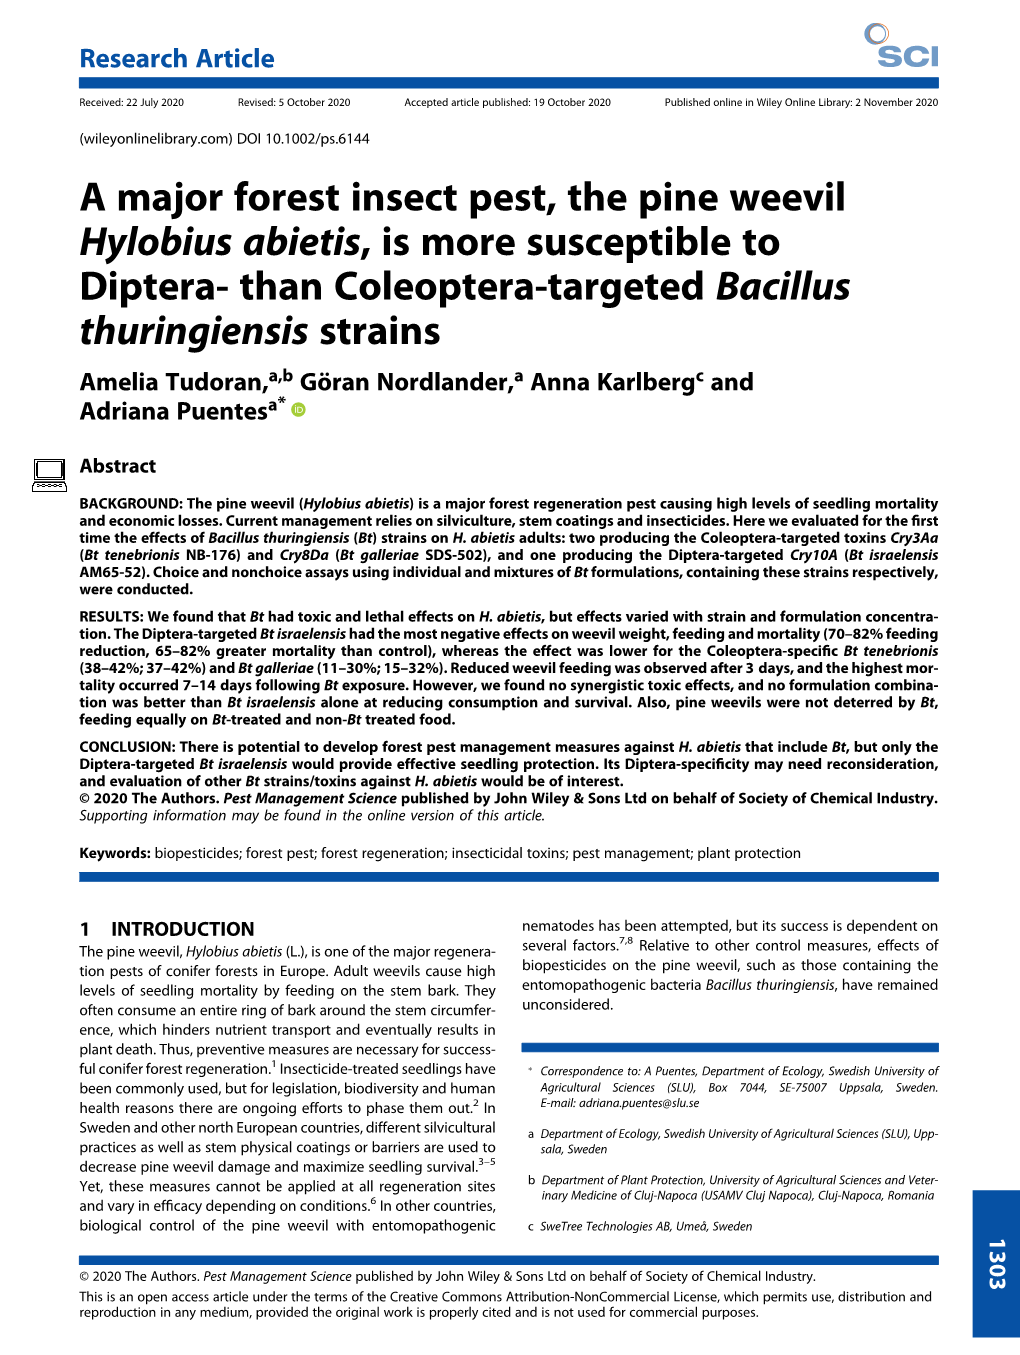 A Major Forest Insect Pest, the Pine Weevil Hylobius Abietis, Is More